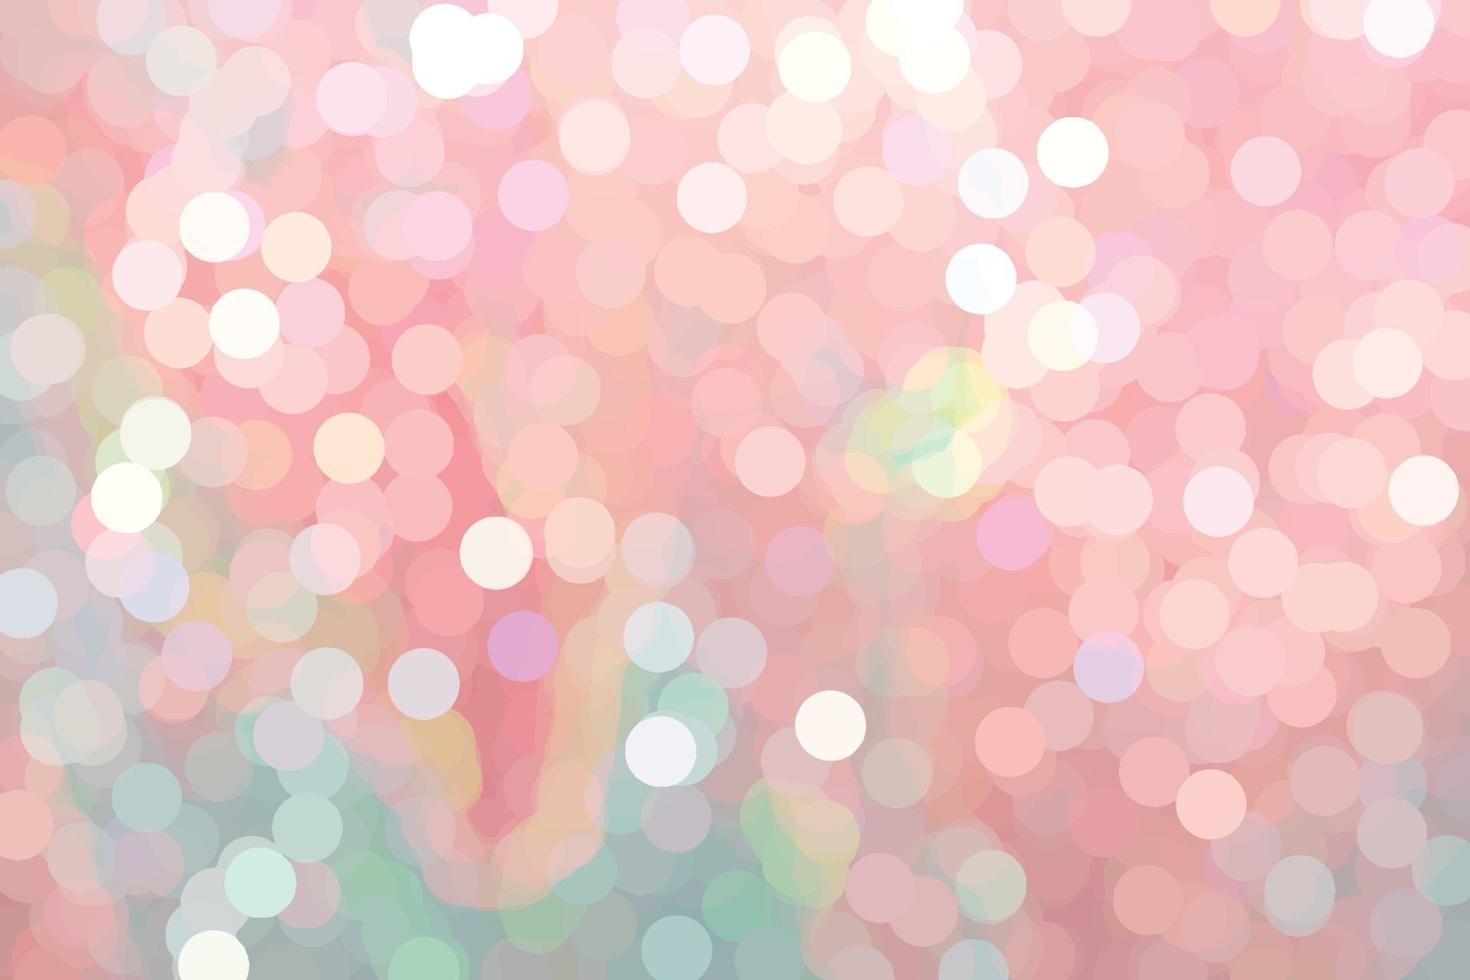 Lighting abstract background vector